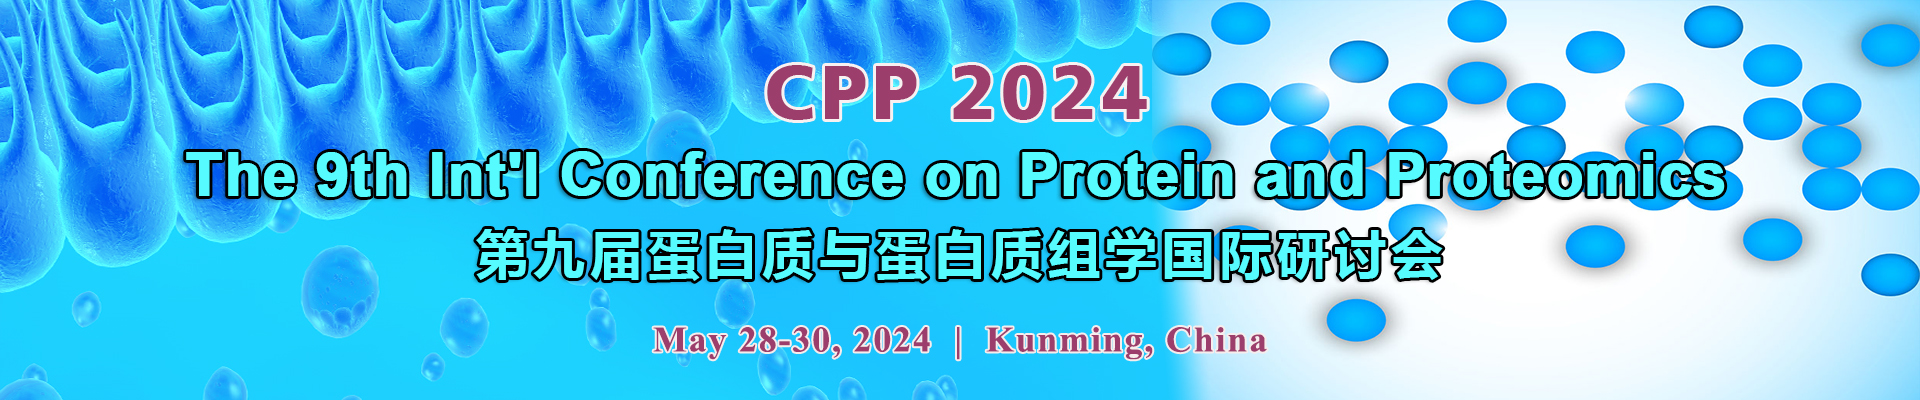 The 9th Int'l Conference on Protein and Proteomics (CPP 2024), Kunming, Yunnan, China